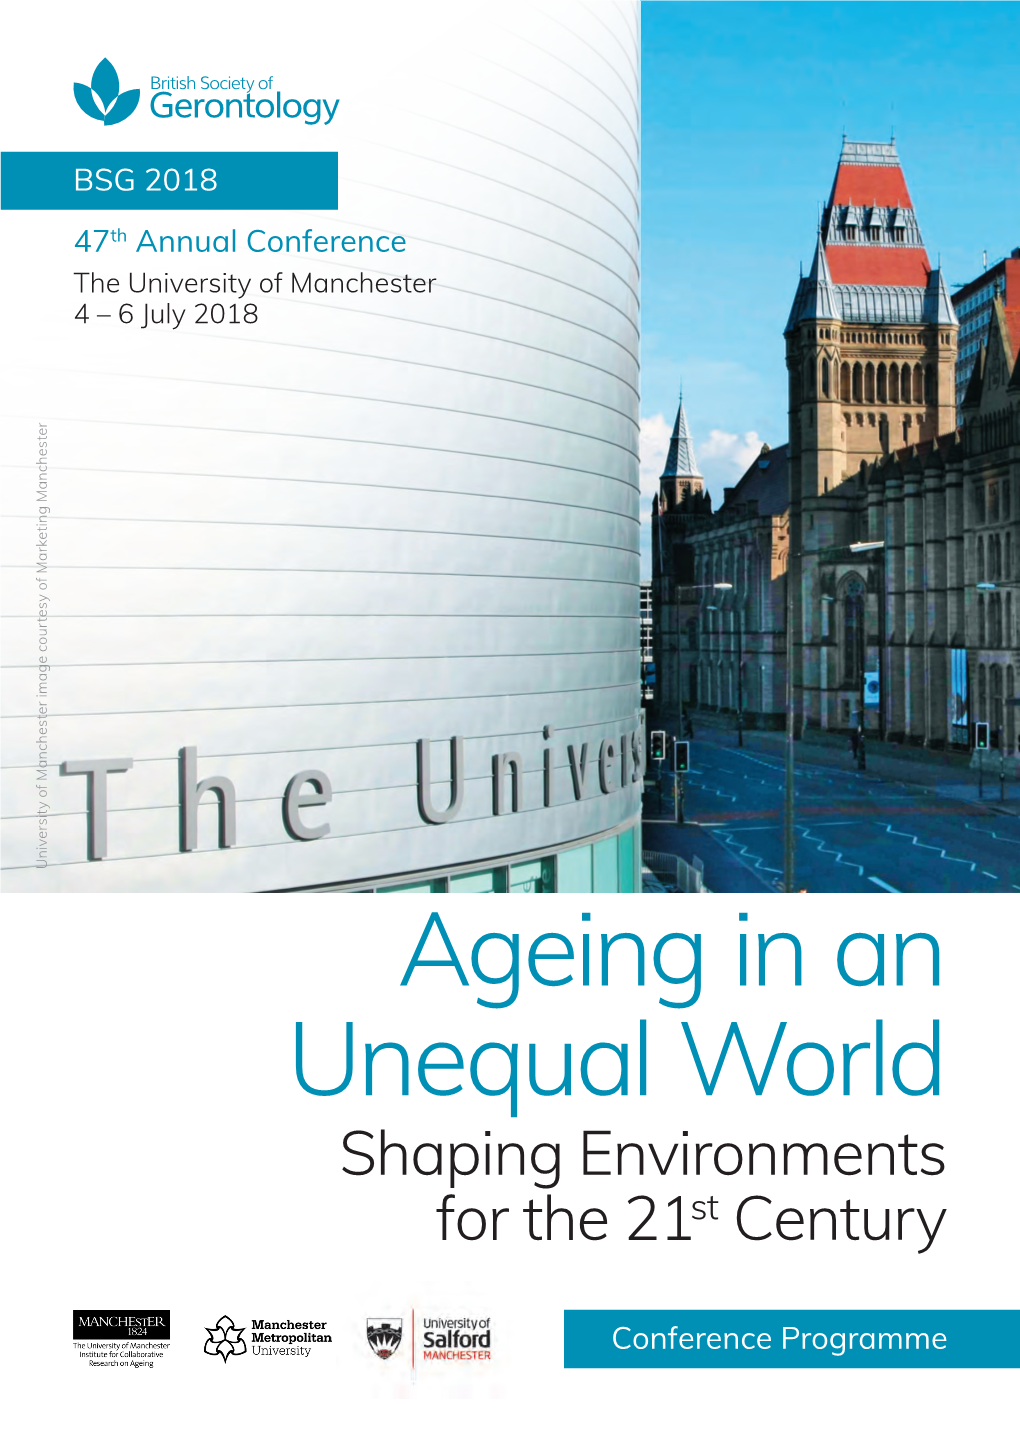 Ageing in an Unequal World Shaping Environments for the 21St Century